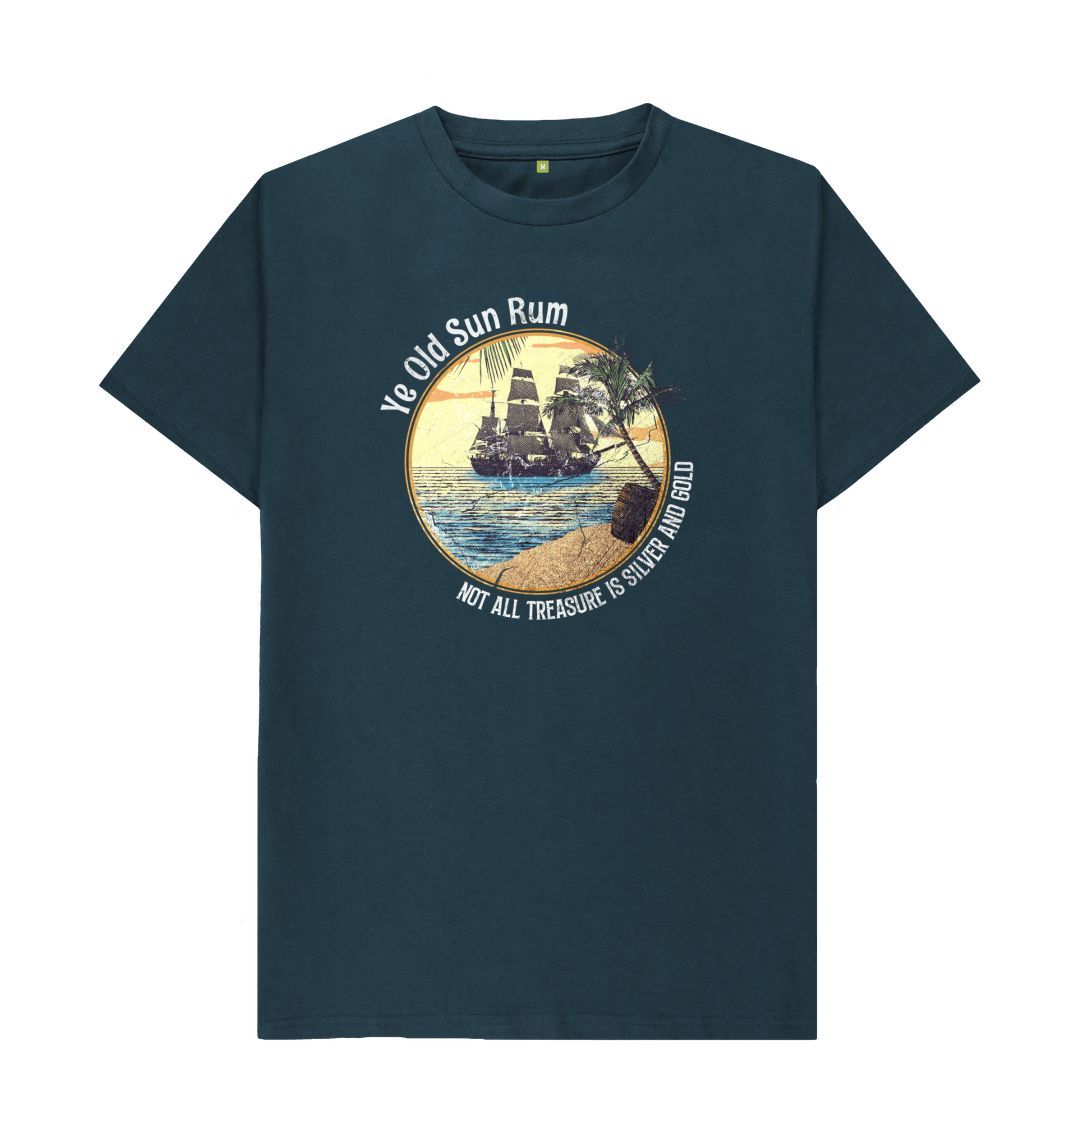 Denim Blue Mens Tee - Old Sun Rum - Not all Treasure is Silver and Gold